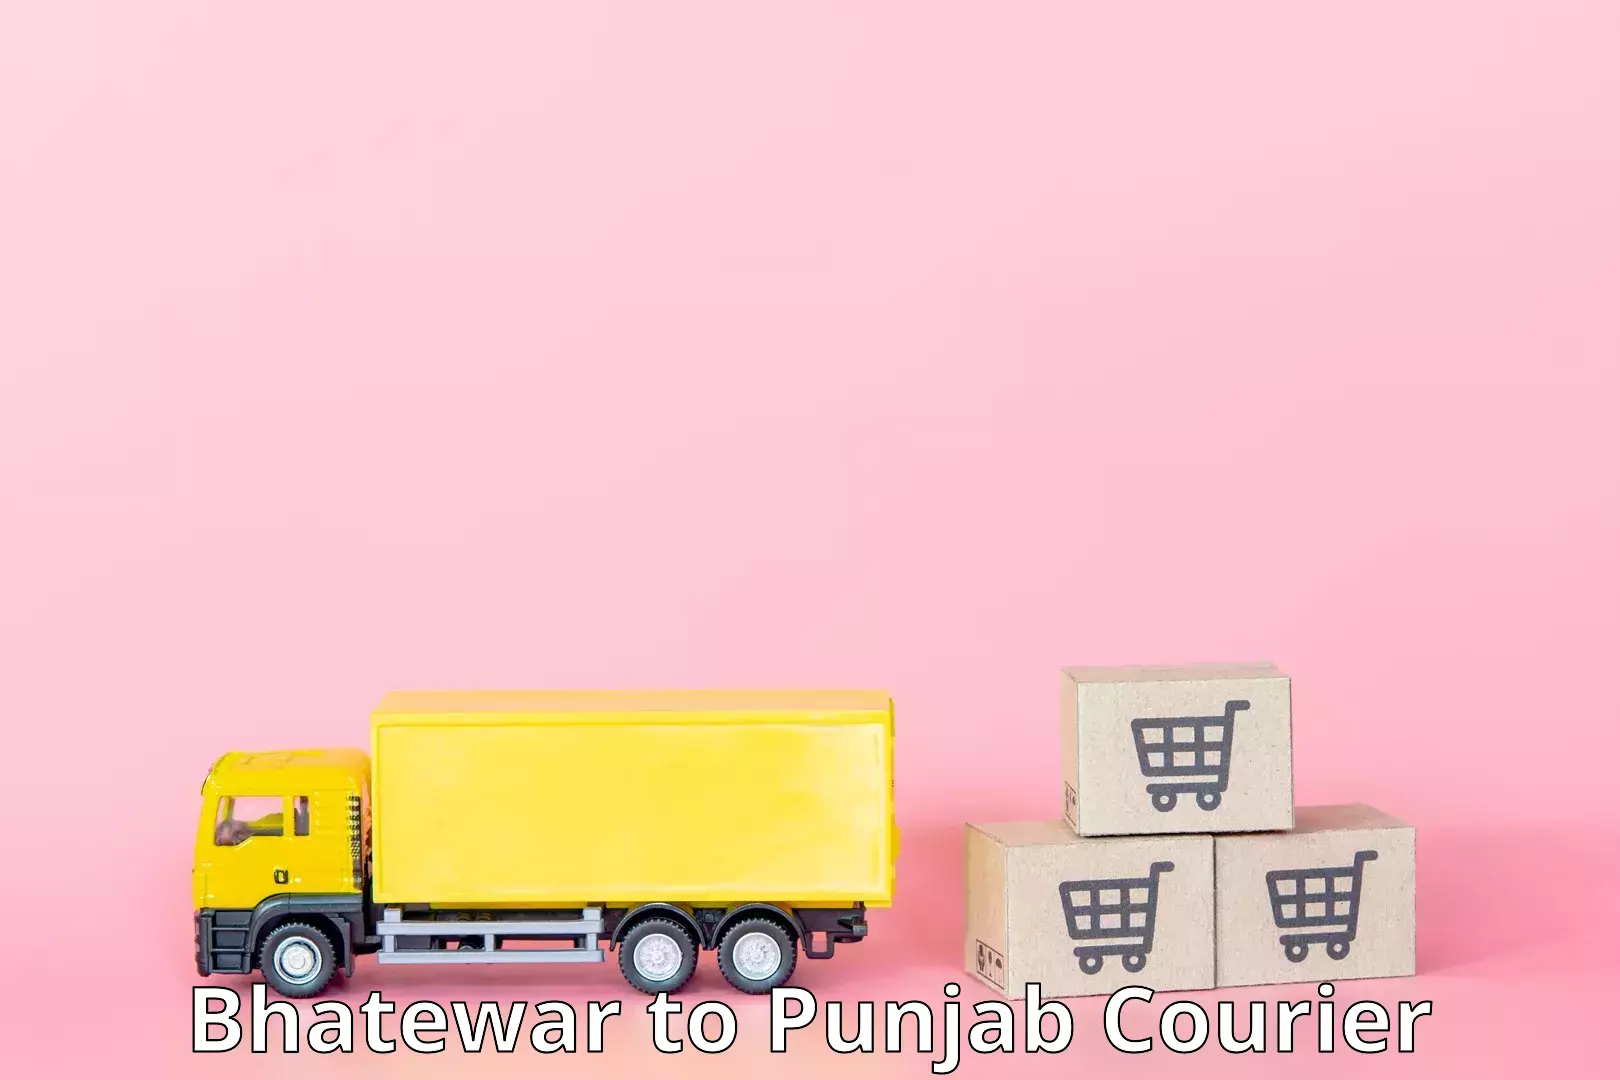 Sustainable delivery practices Bhatewar to Punjab